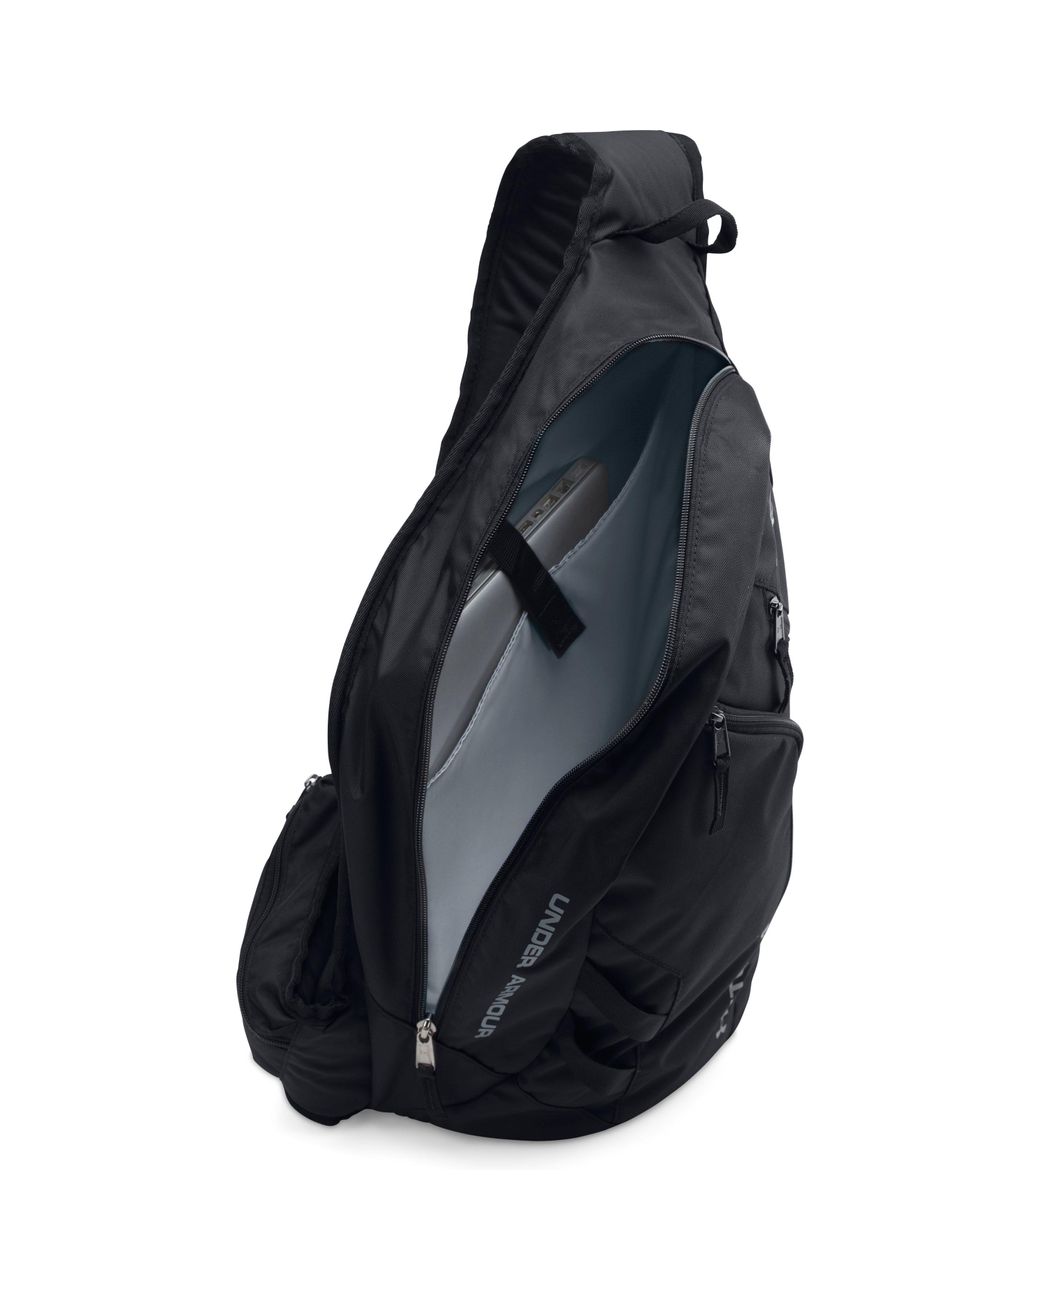 Under Armour Ua Compel Sling 2.0 Backpack in Black | Lyst